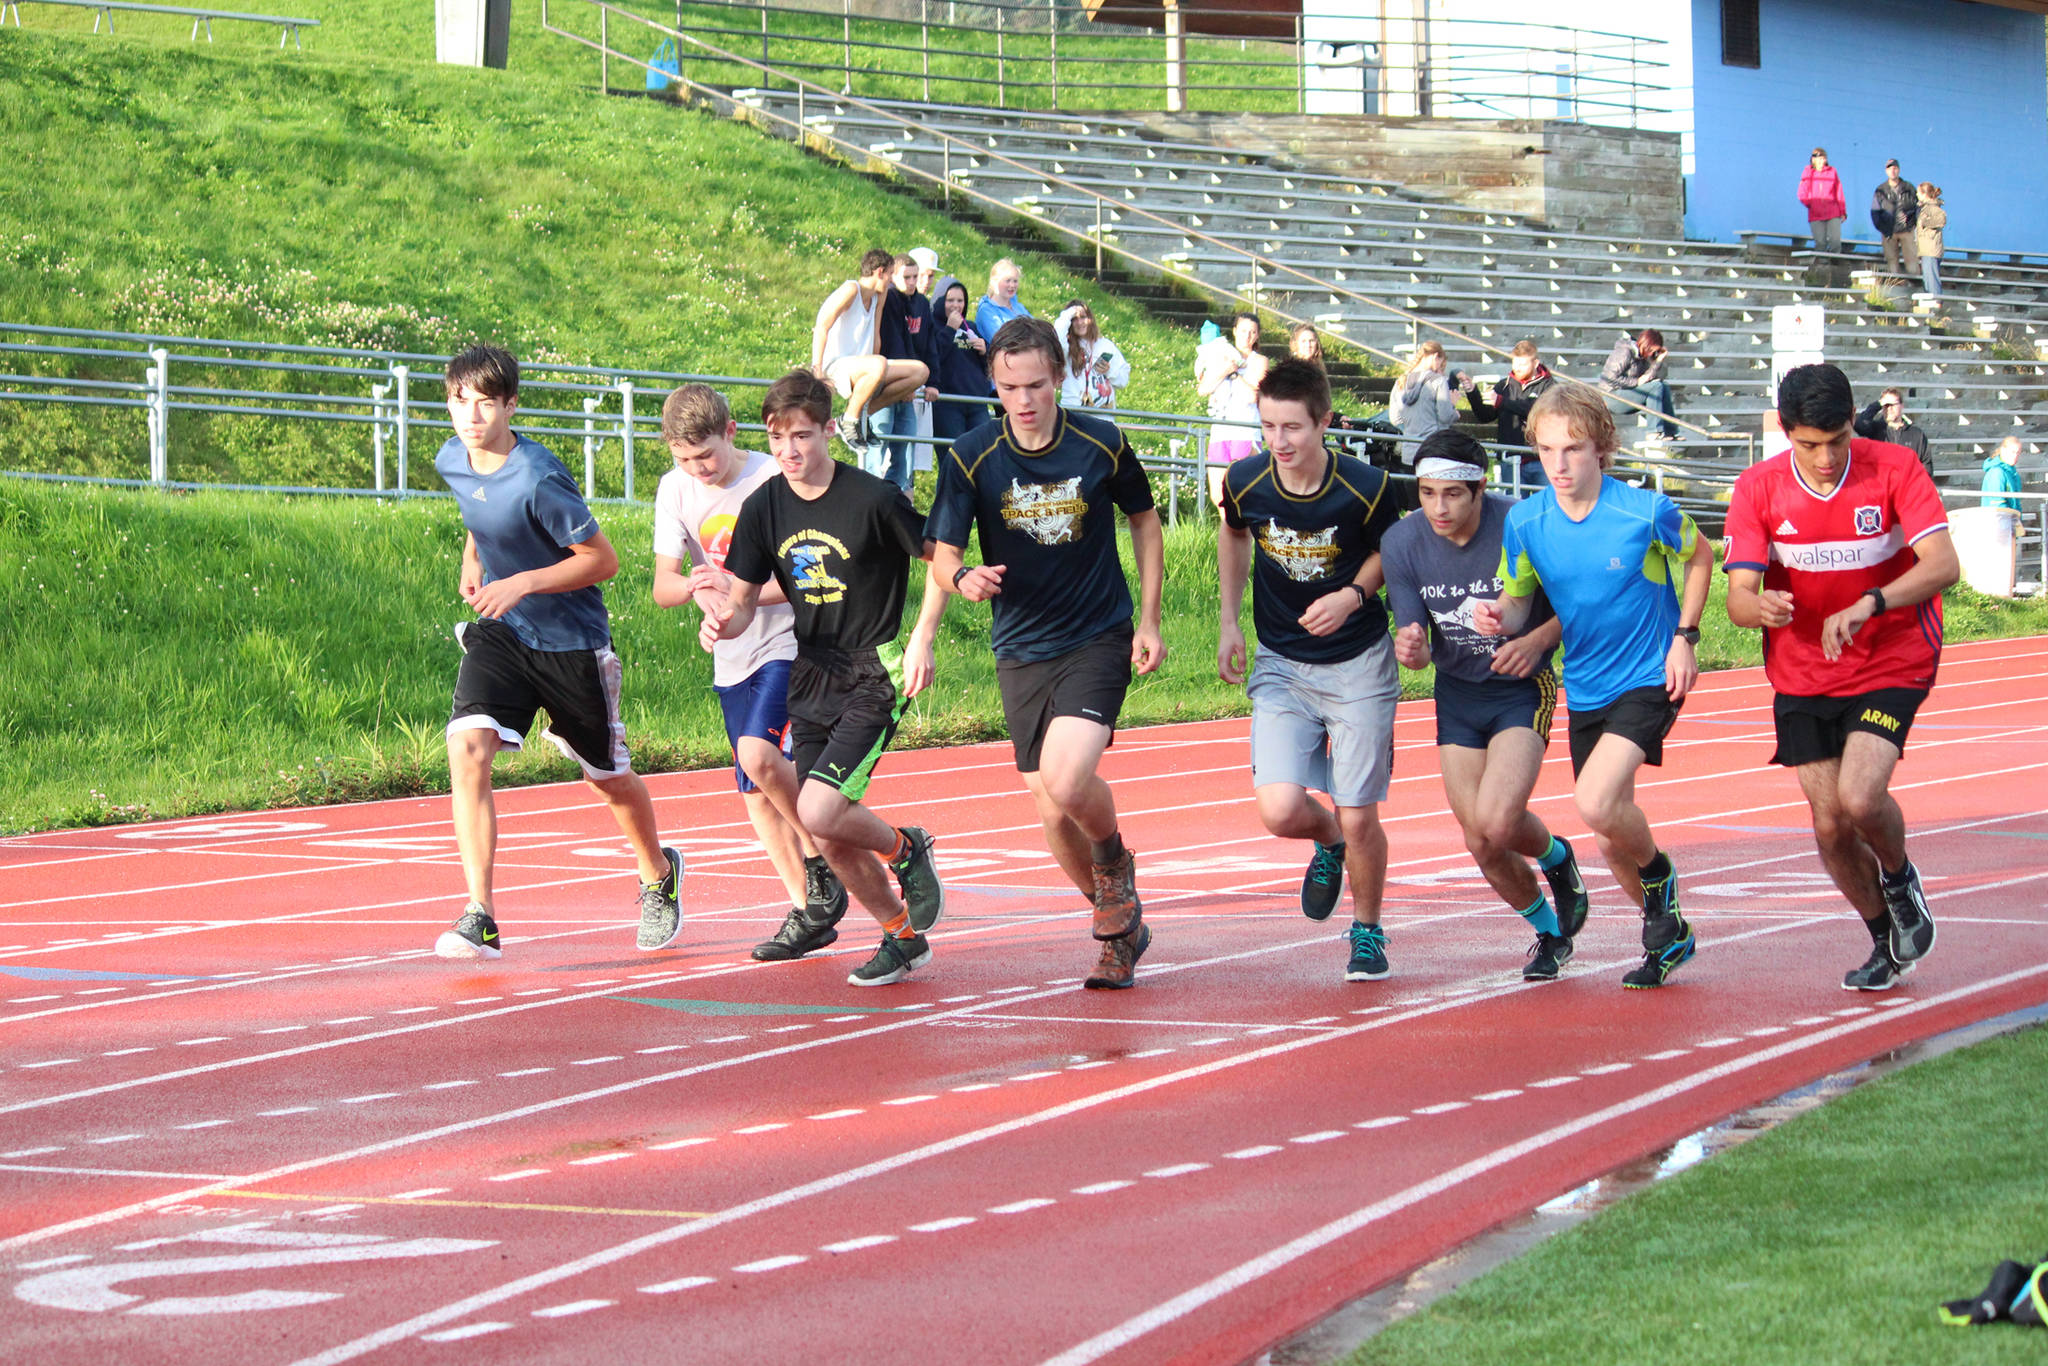 A group of male runners takes off from the starting line of the Mariner Mile, a new event held Thursday, Sept. 14, 2017 at the Homer High School running track in Homer, Alaska. The event, in which people could sign up to run one mile around the track in different heats, was a fundraiser for the Kachemak Bay Running Club. (Photo by Megan Pacer/Homer News)